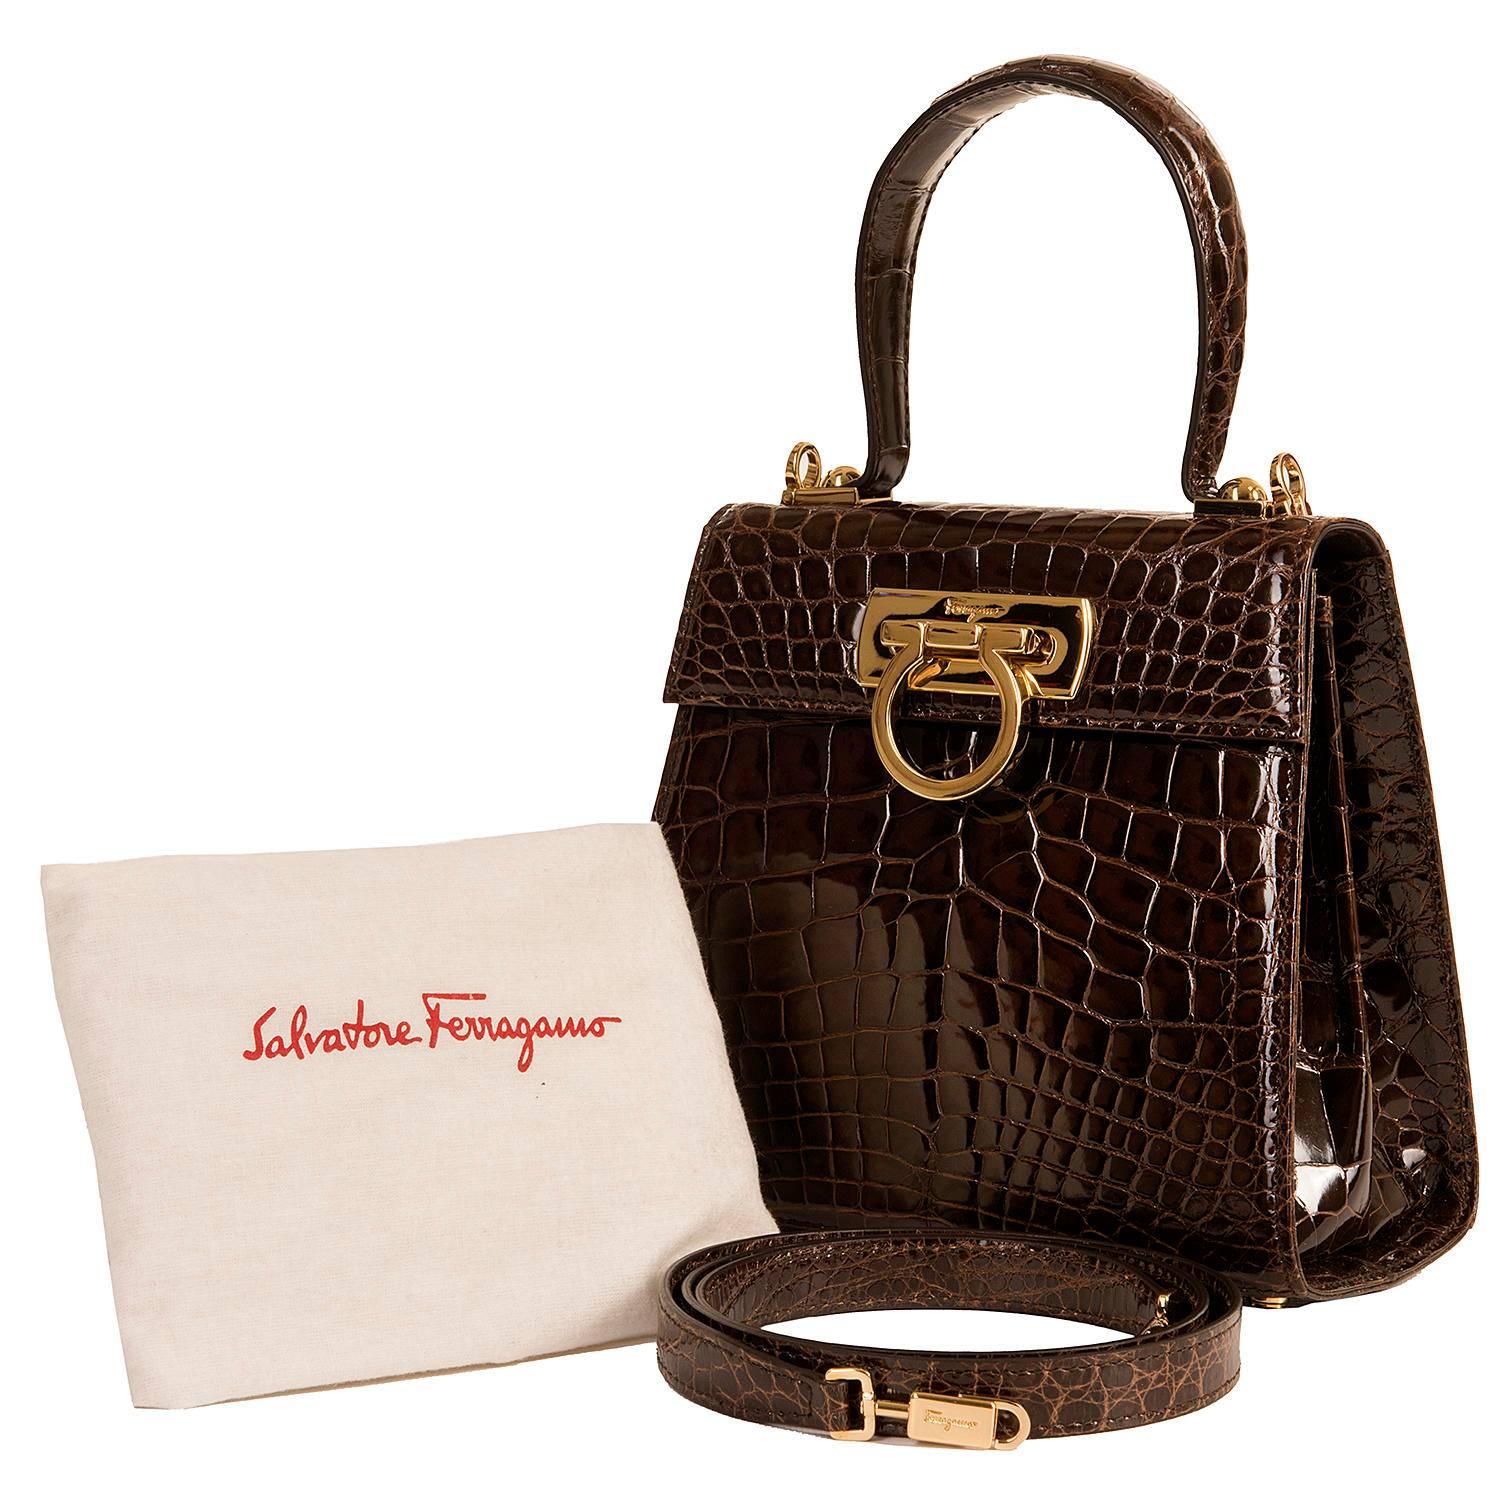 Never worn, this absolutely fabulous 'Shiny Porosus Crocodile' Bag by Salvatore Ferragamo, is a 'Limited Edition' - number 30 of only 100 made worldwide. Finished in Chocolate Brown with Gold hardware, with a beige suede interior, the bag is